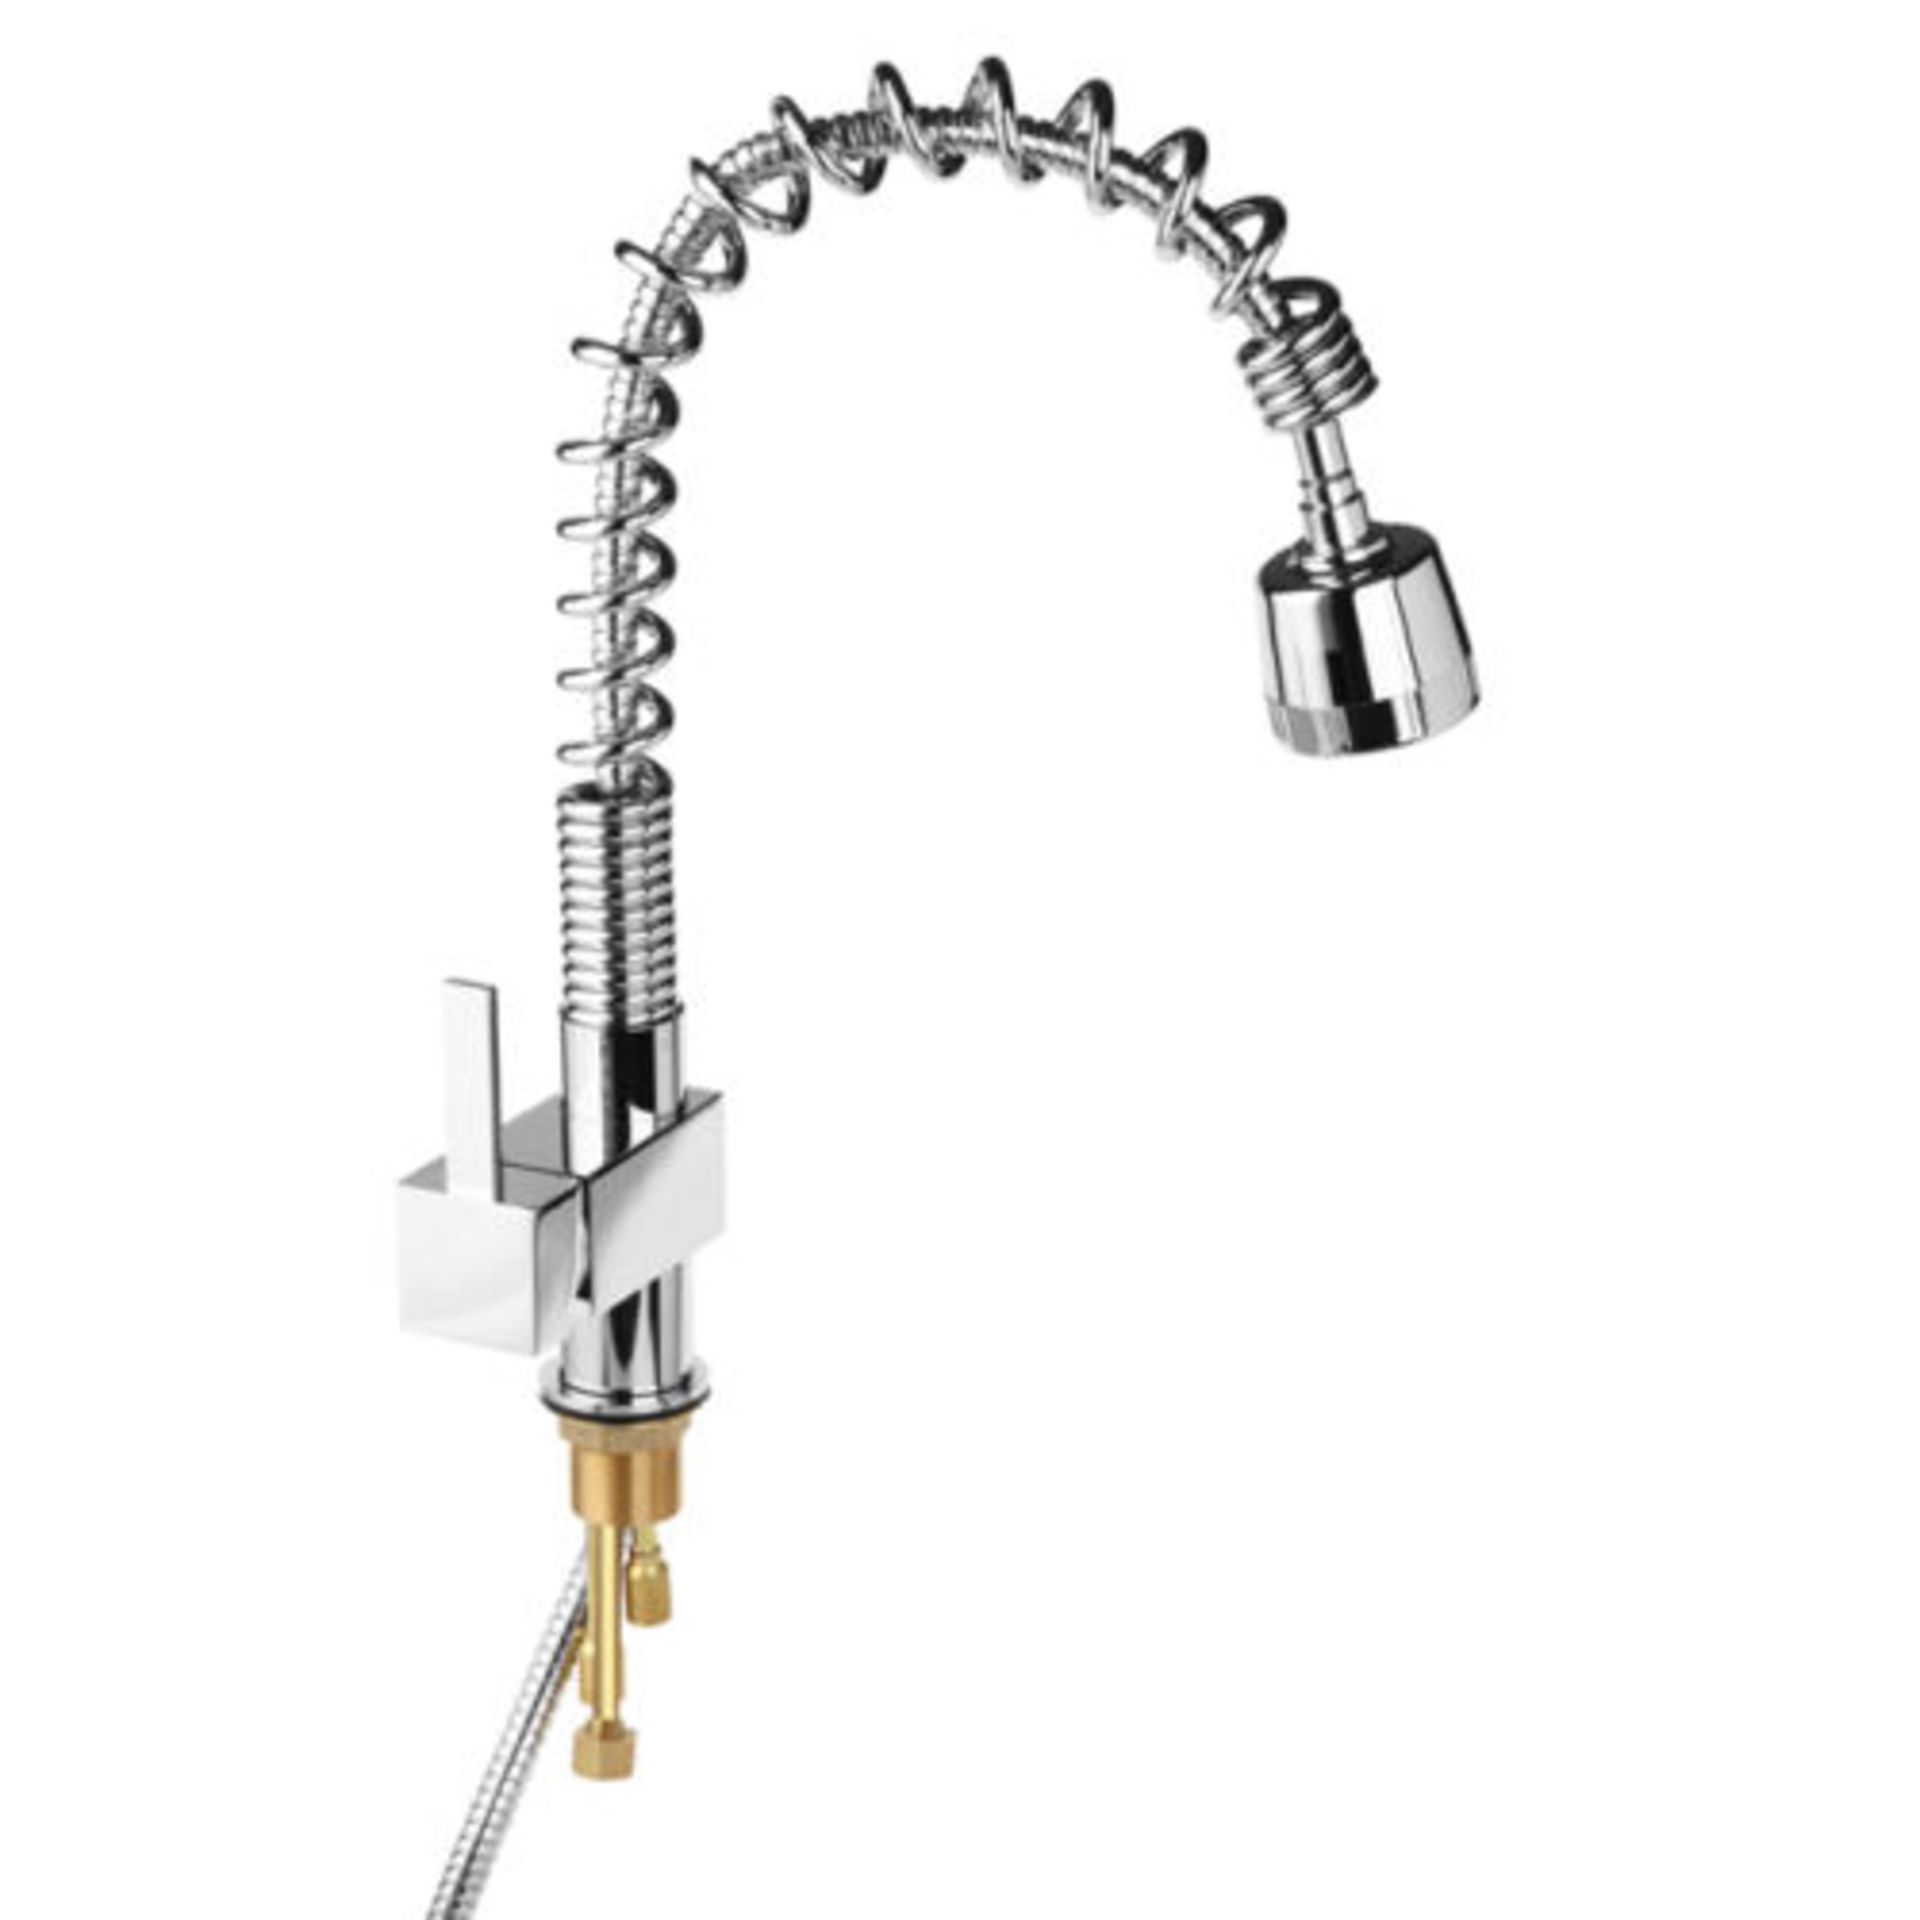 New Maddie Brushed Chrome Monobloc Kitchen Tap Swivel Pull Out Spray Mixer. RRP £219.99.Mater... - Image 2 of 3